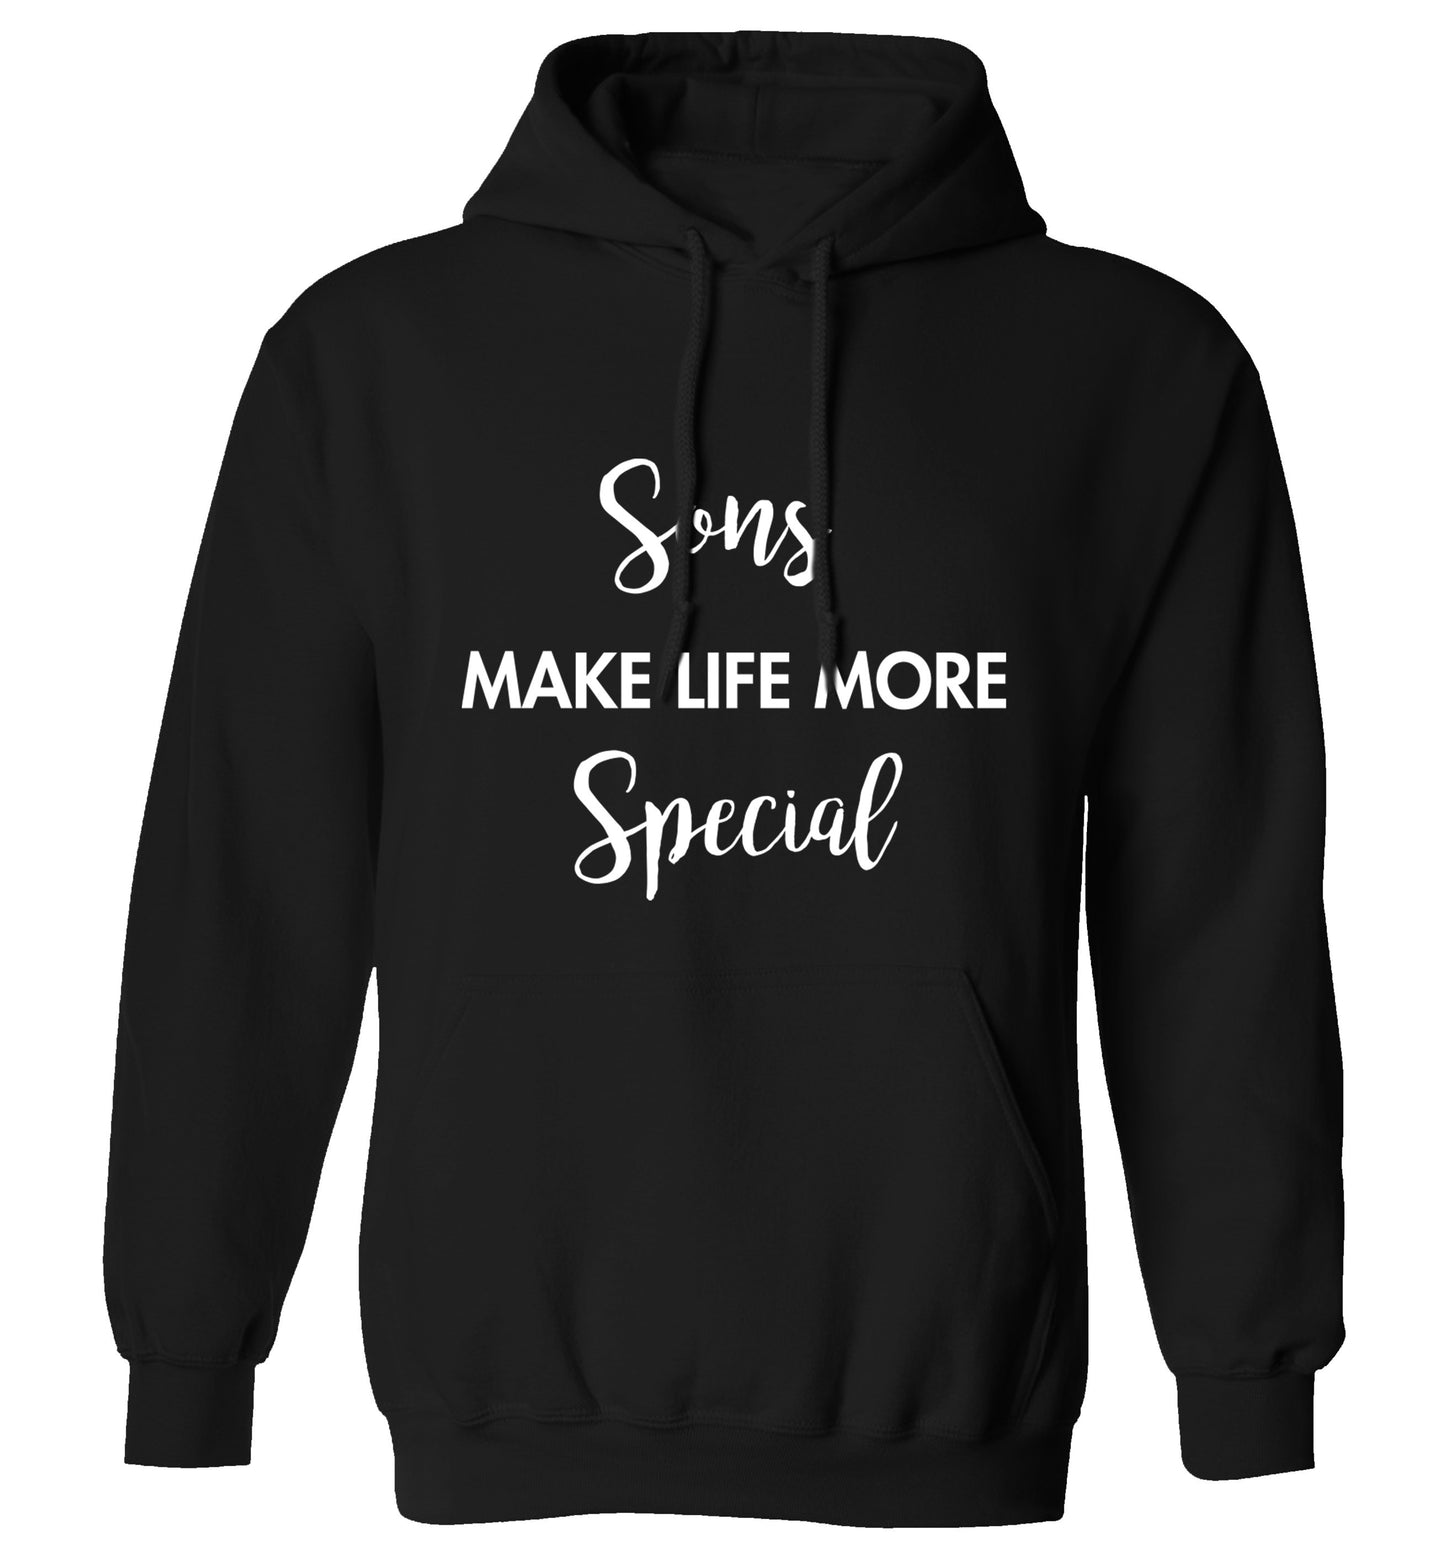 Sons make life more special adults unisex black hoodie 2XL